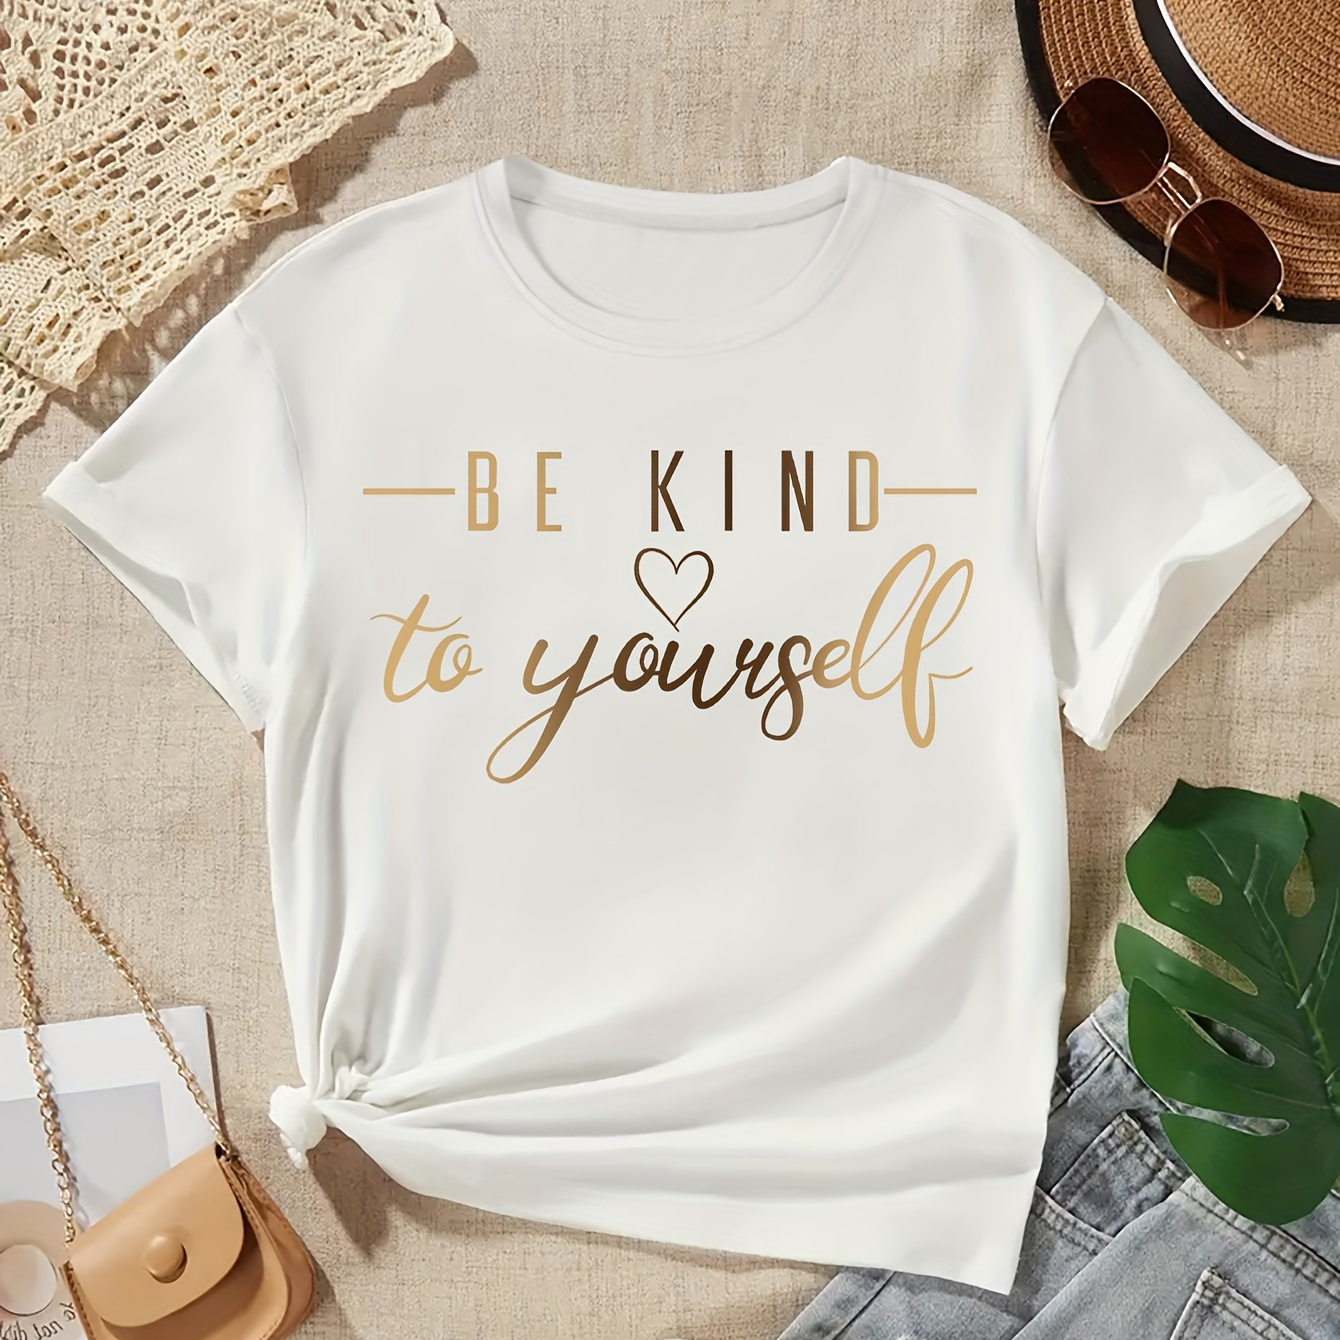 

Be Kind To Yourself & Heart Graphic Print Tee, Tween Girls' Stylish & Comfy Crew Neck Short Sleeve T-shirt For Spring & Summer, Tween Girls' Clothes For Everyday Life